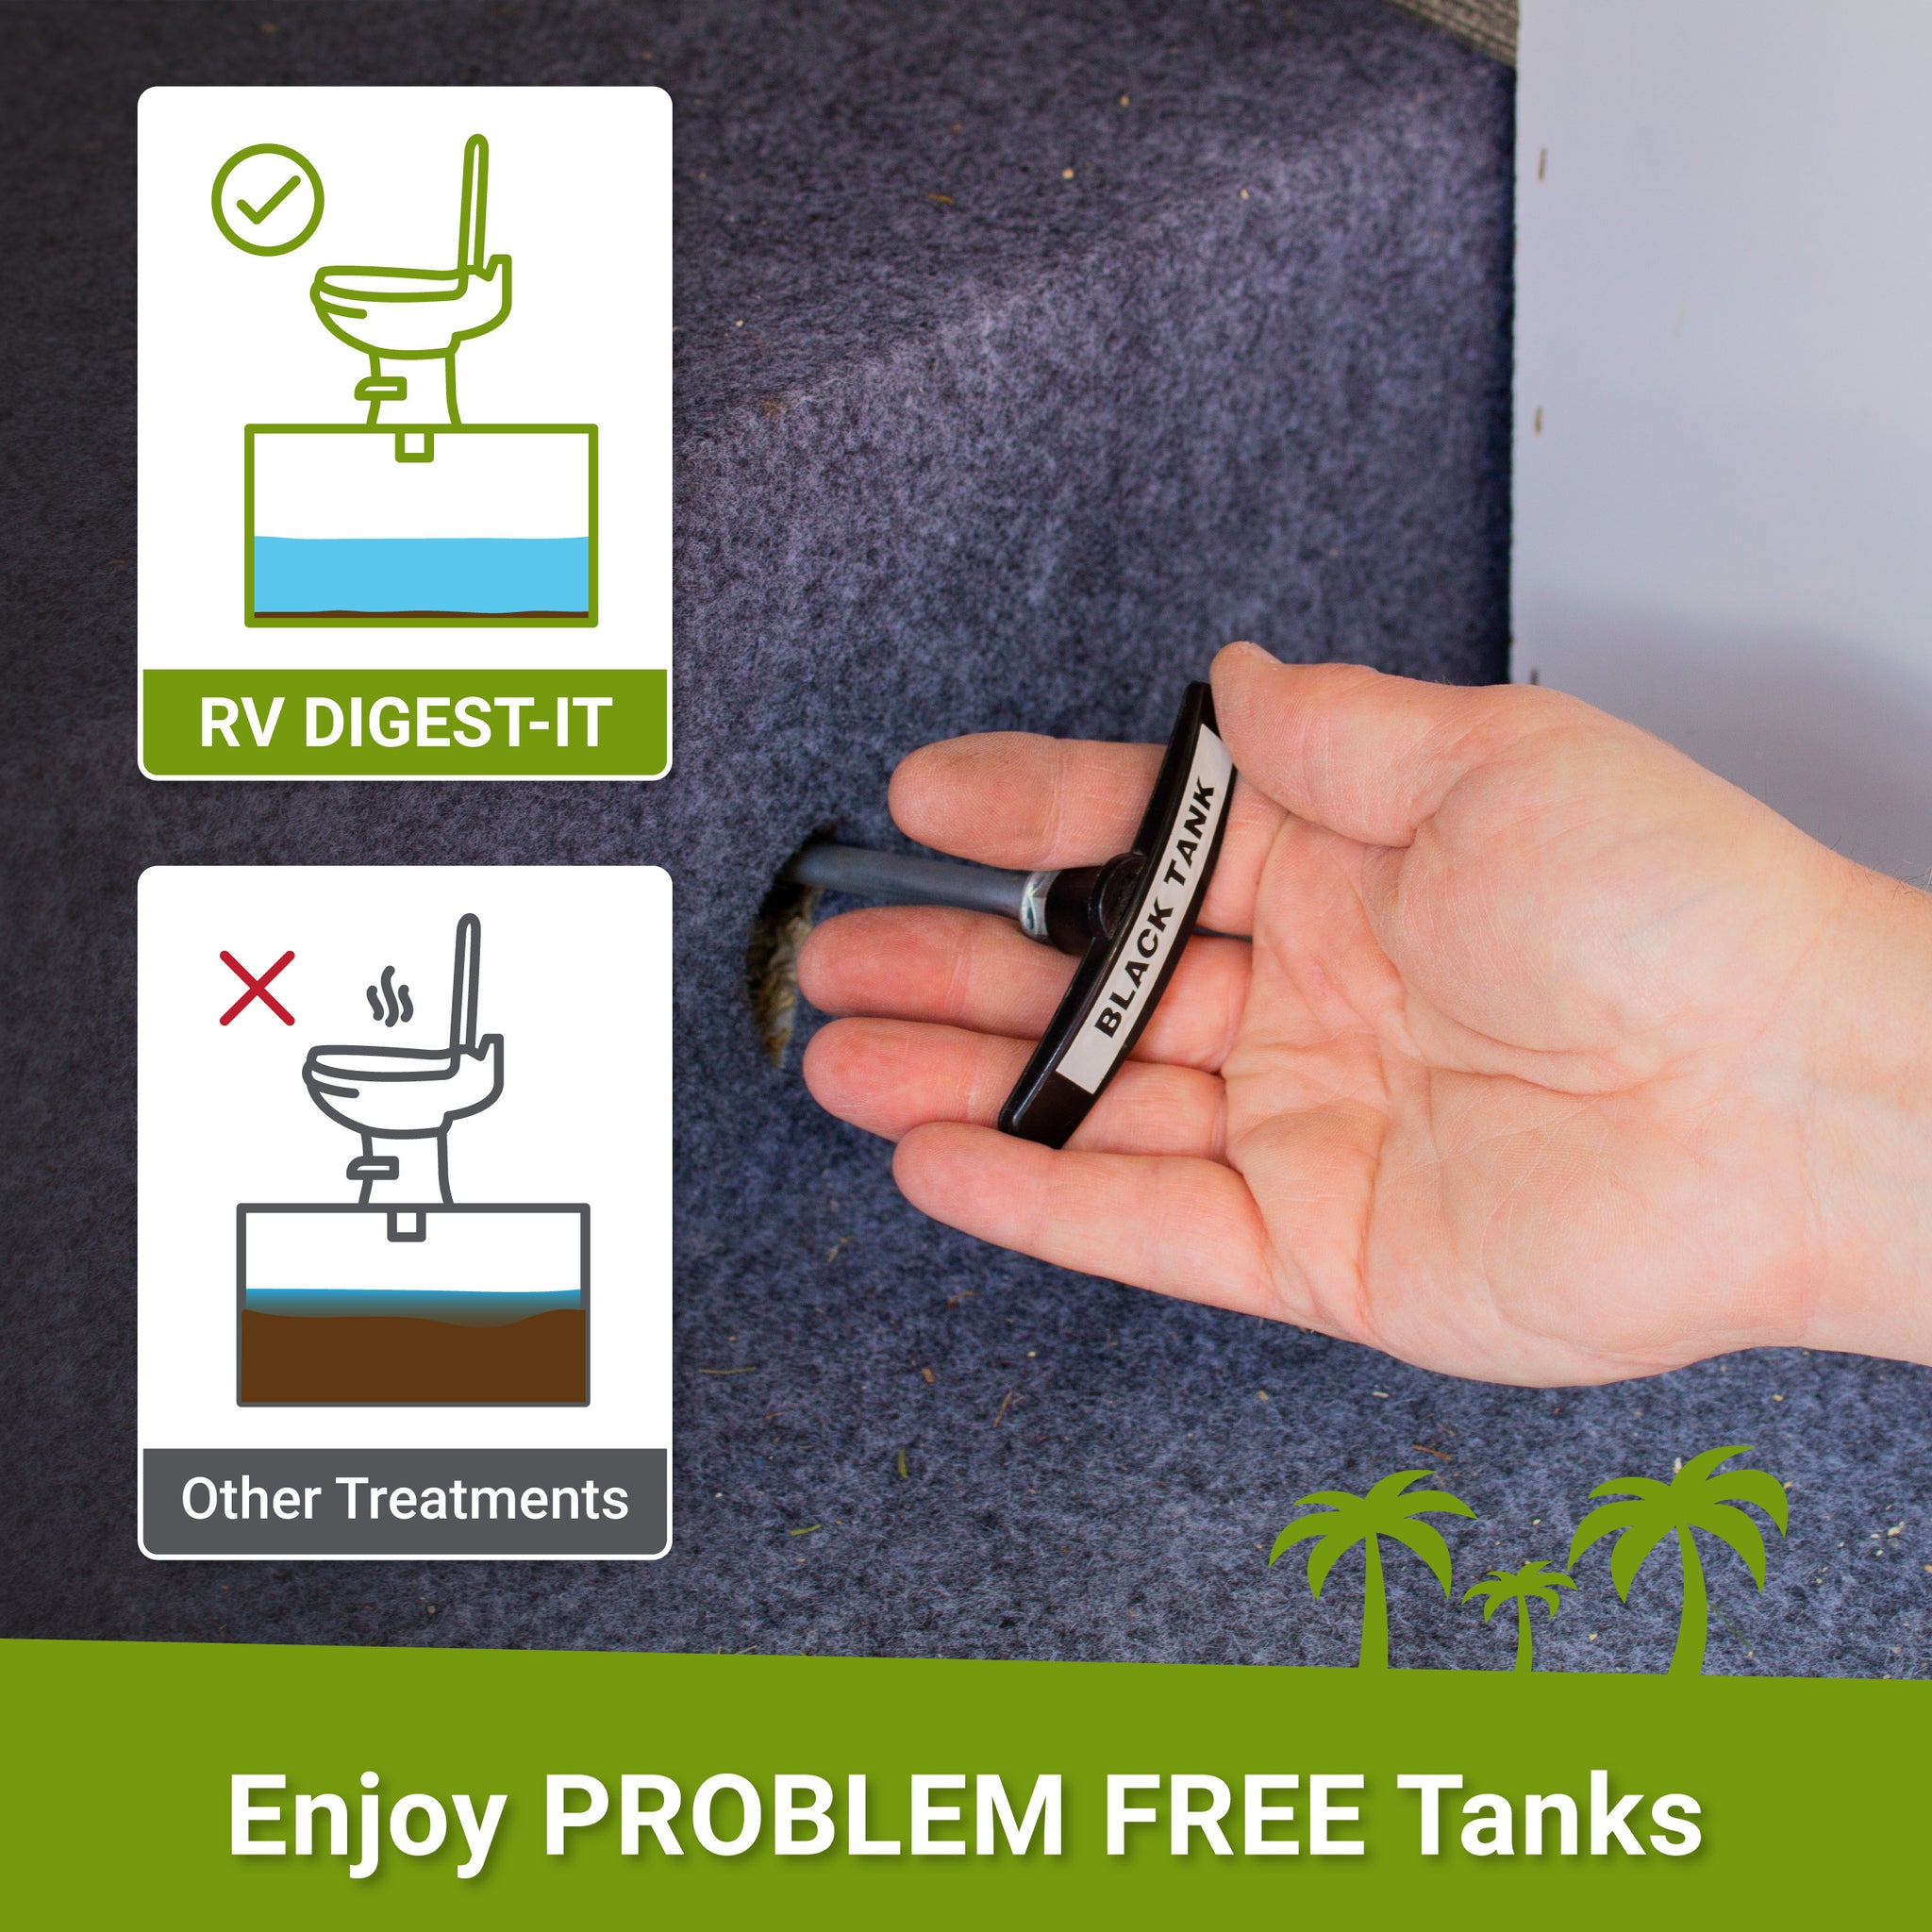 RV Black Tank Treatment Toilet Chemicals - 16 Treatments Waste Digester for Holding  Tank, Gray Water Tank